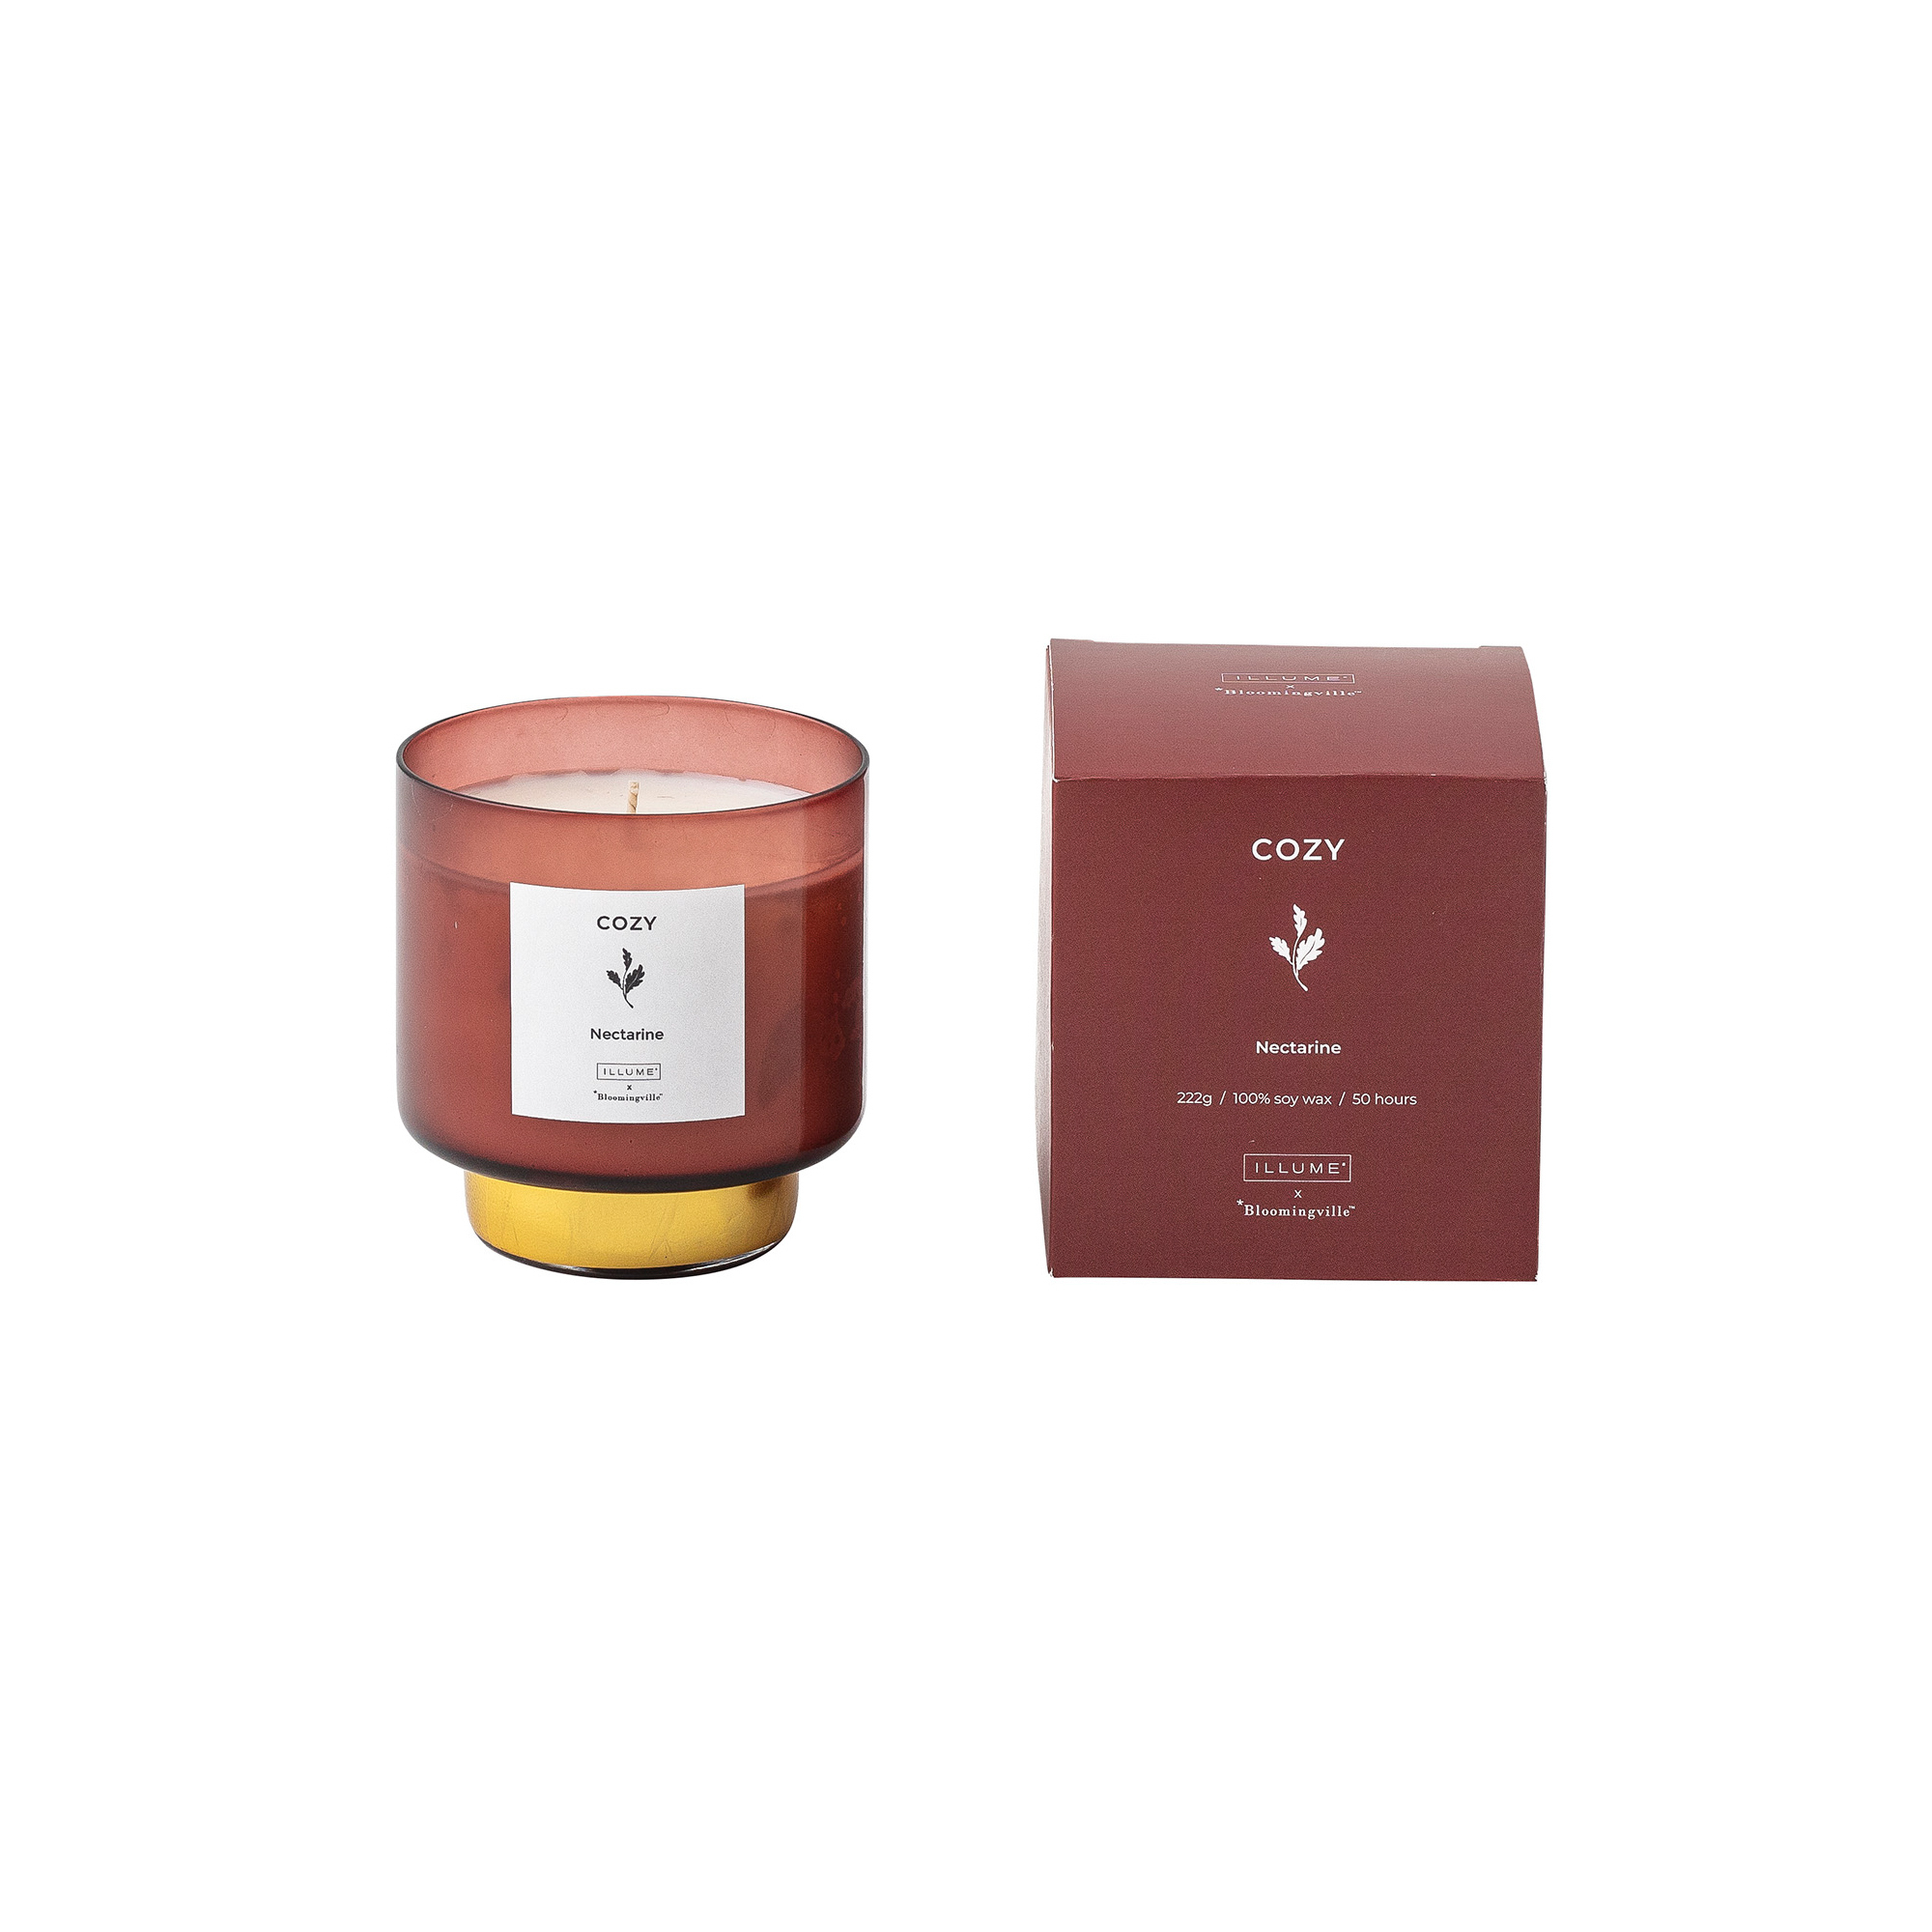 Cozy Nectarine Scented Candle